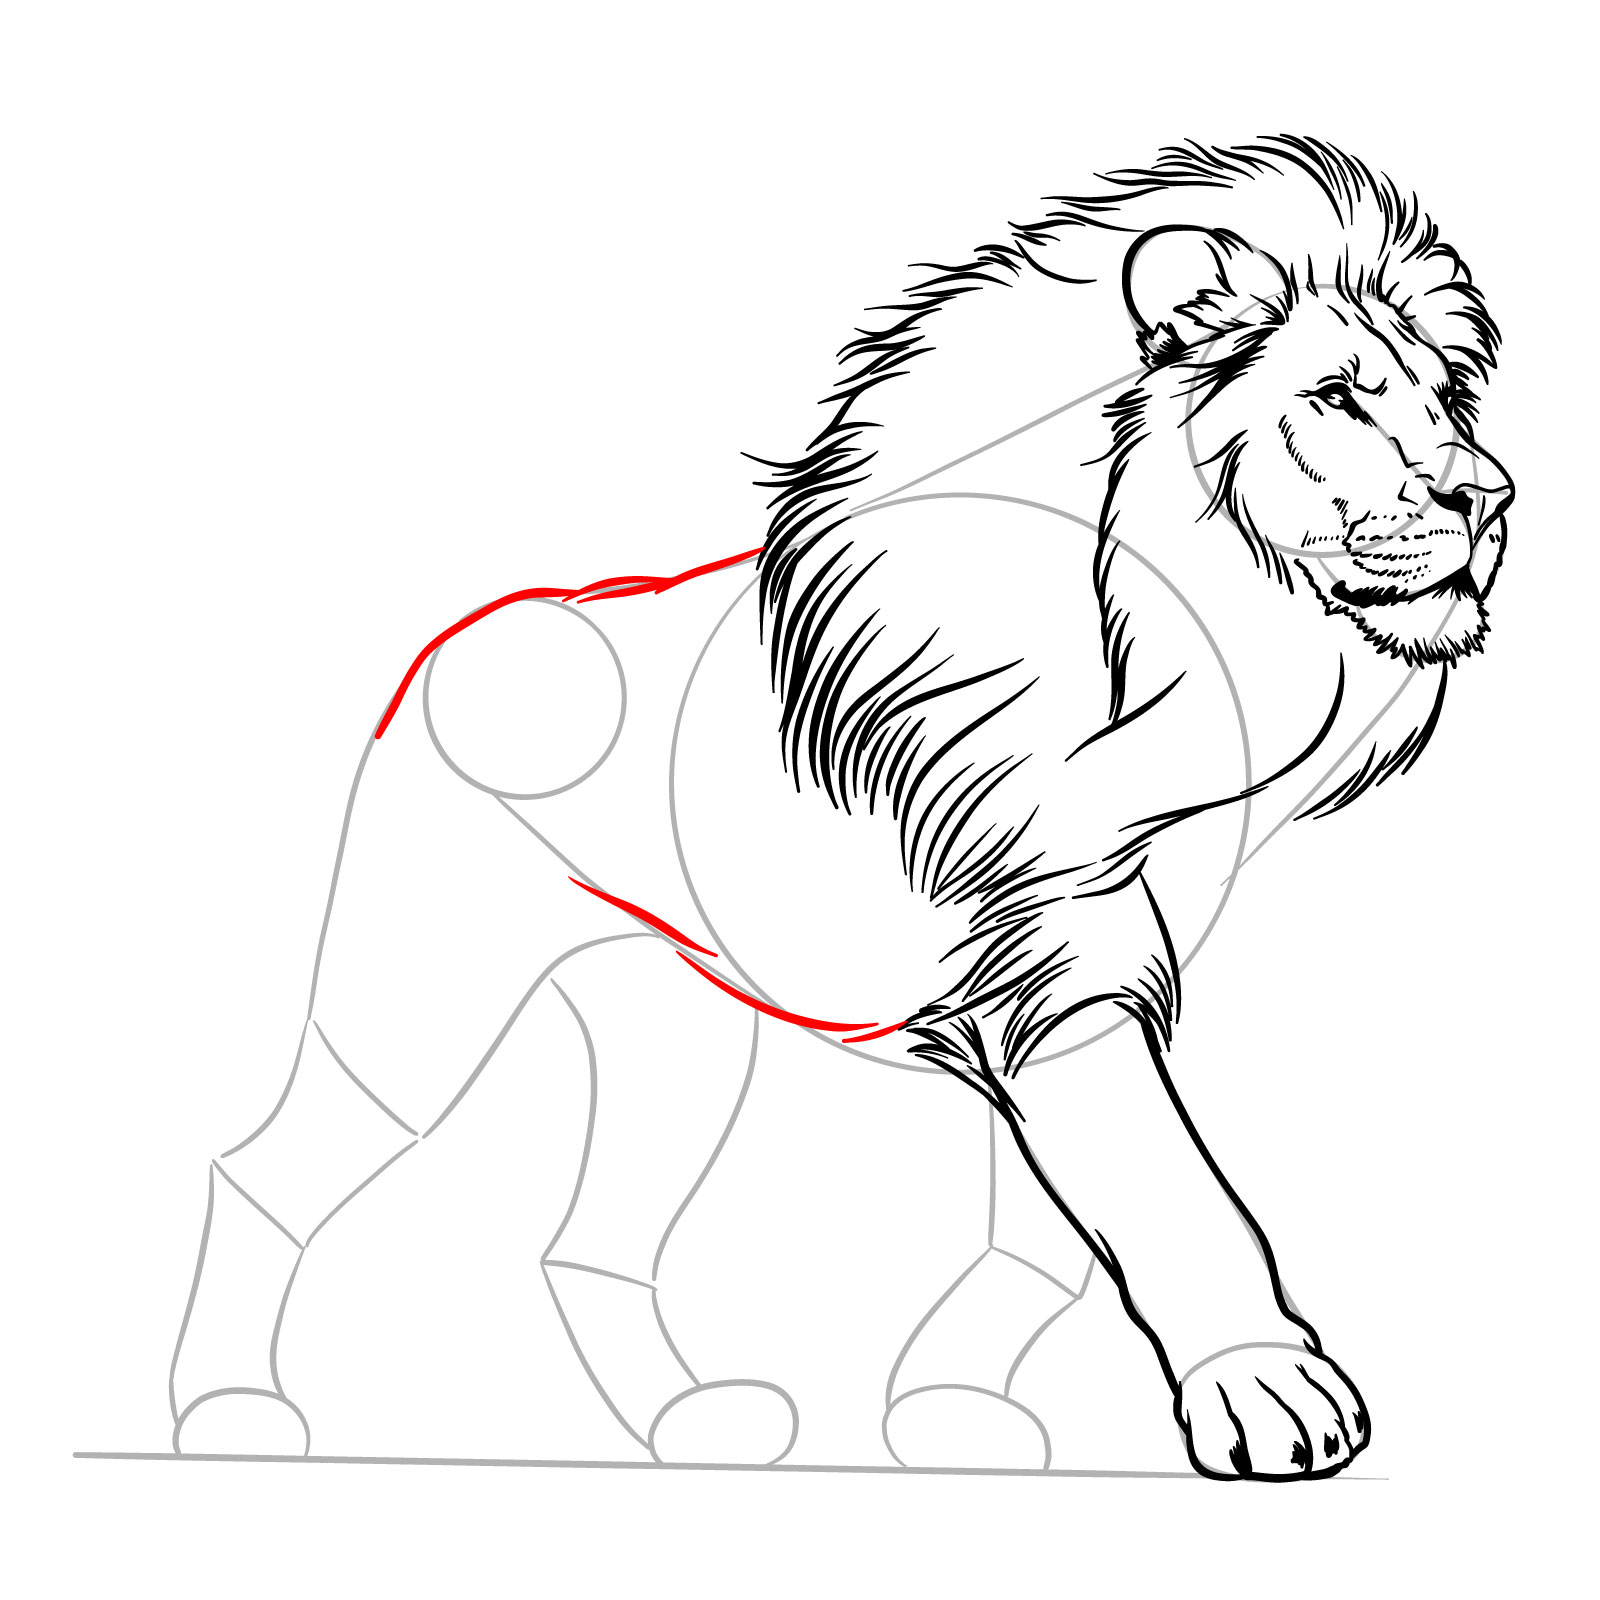 Adding the belly and back to a walking lion drawing - step 10